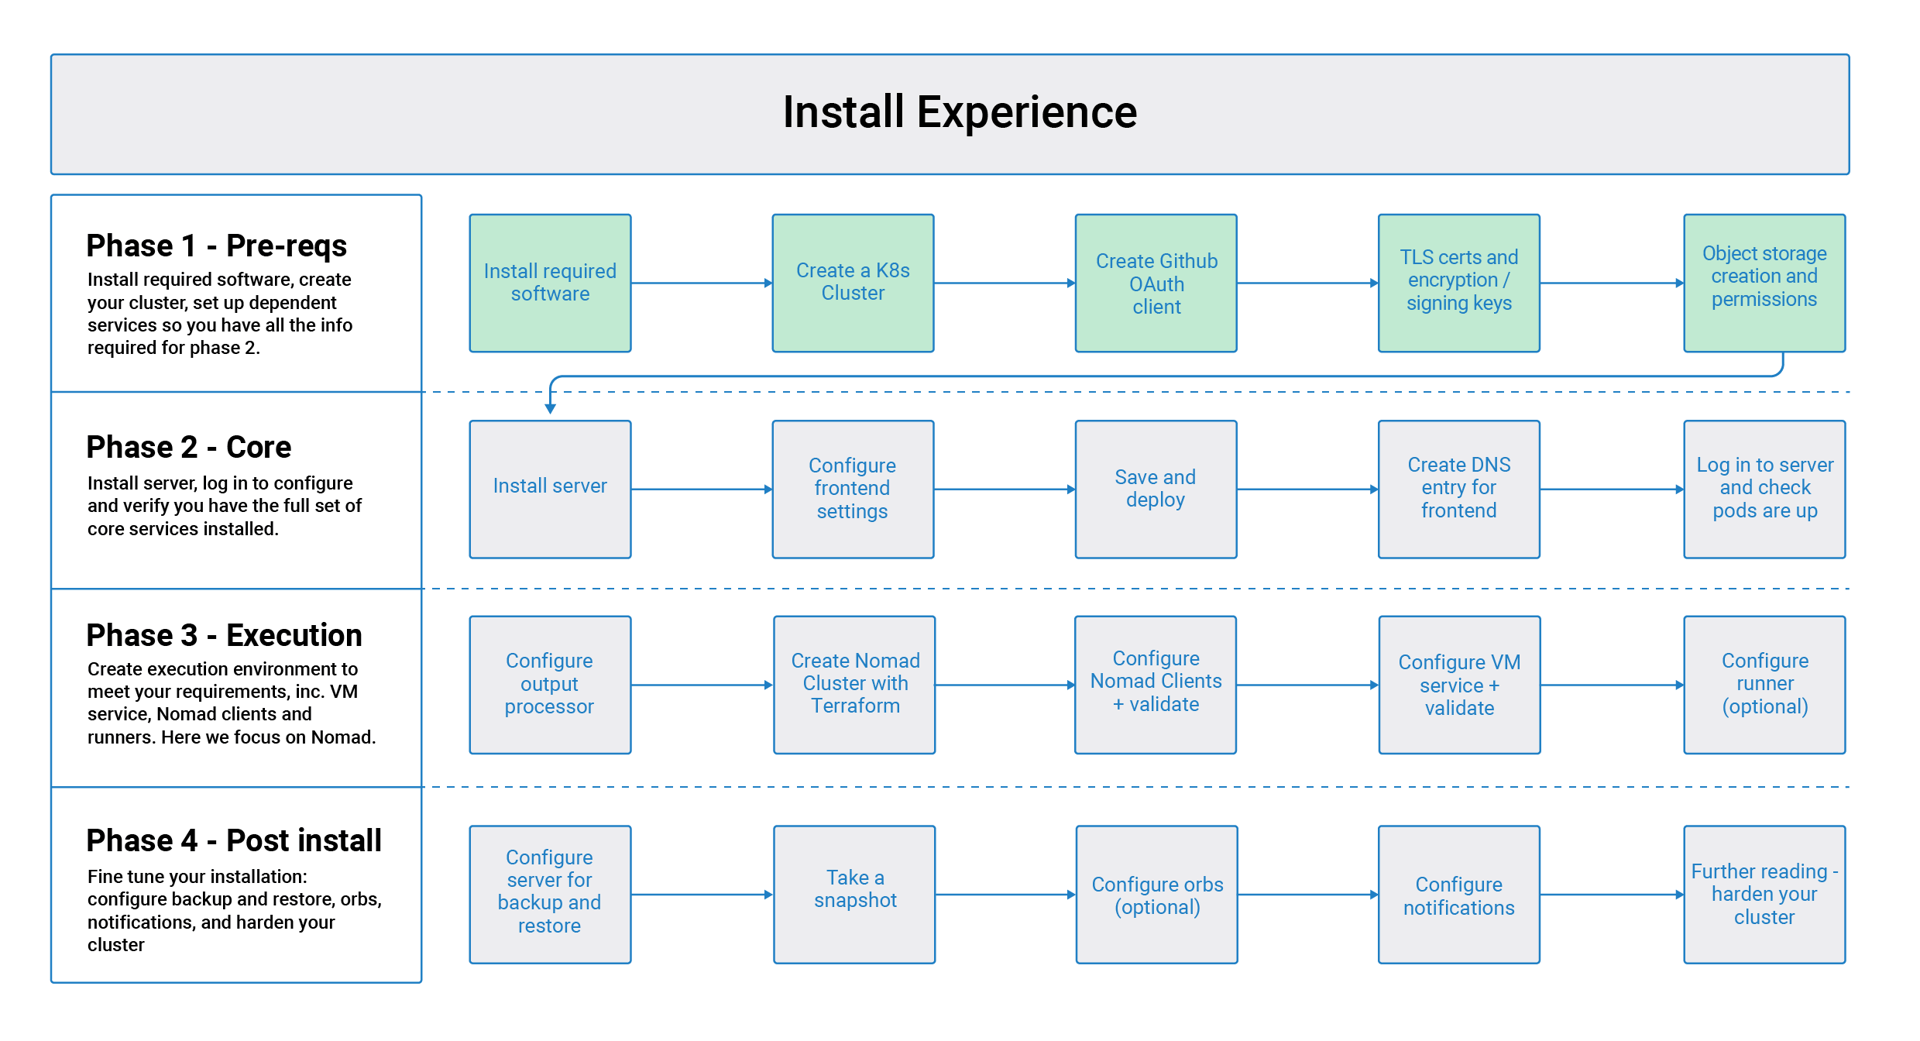 Flow chart showing the installation flow for server 3.x with phase 1 highlighted